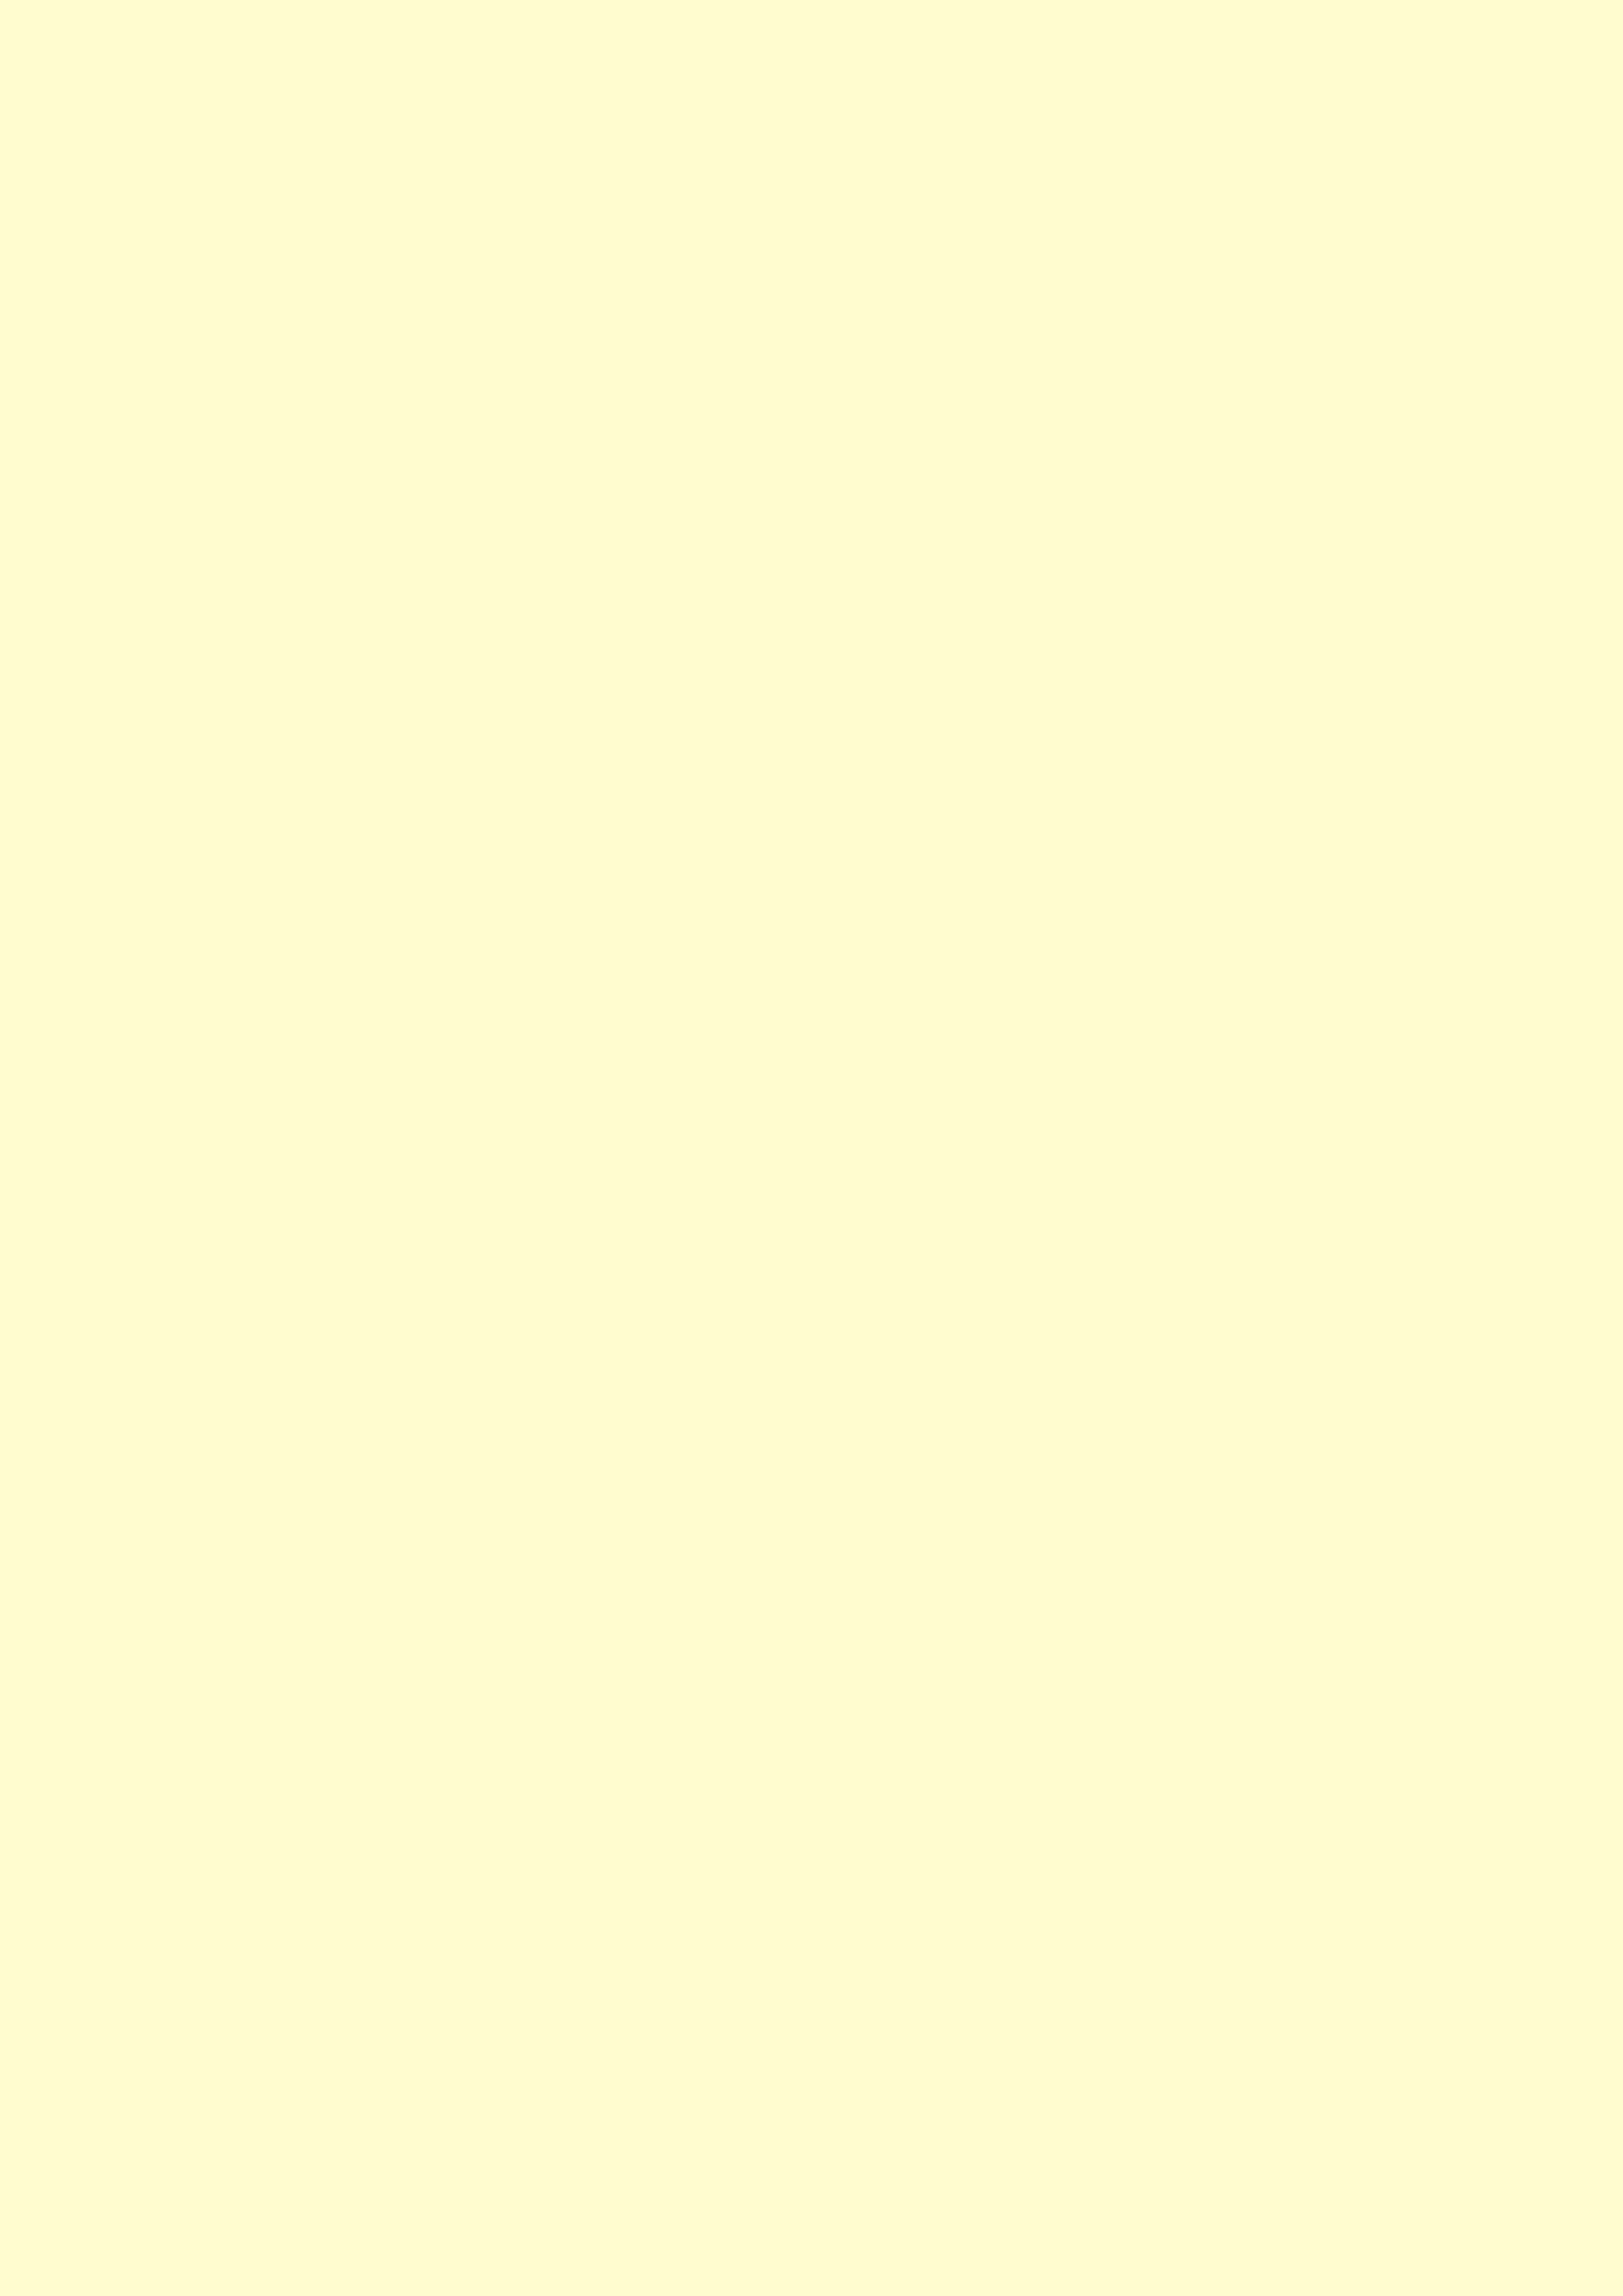 2480x3508 Cream Solid Color Background